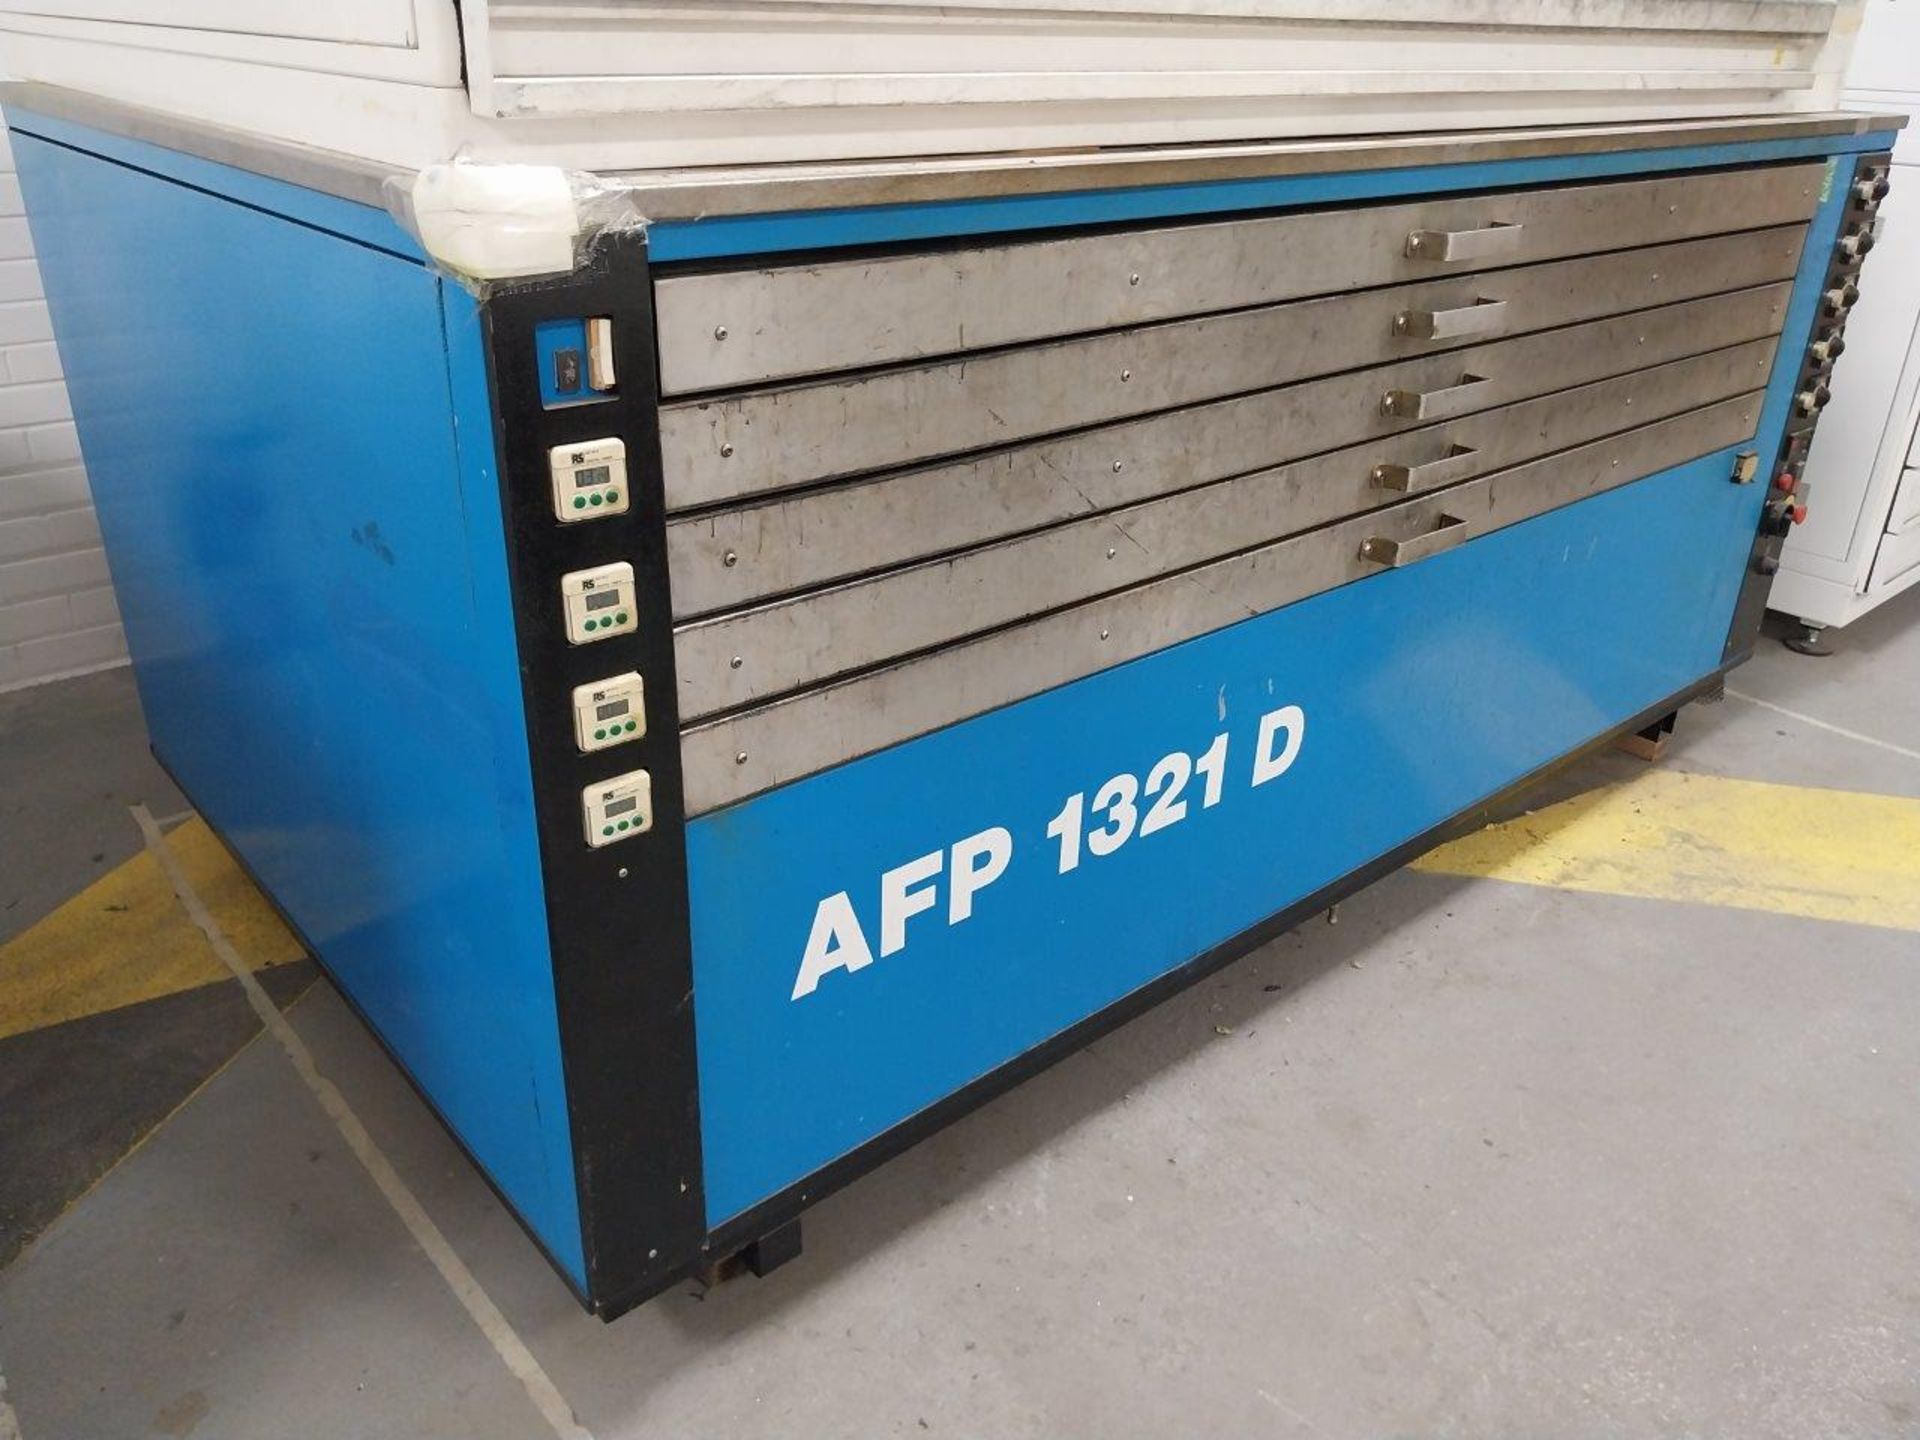 Photomeca AFP1321D 5 drawer drying unit, Serial number 95022, kw:6.5, Mfr date 07/95 - Image 3 of 4